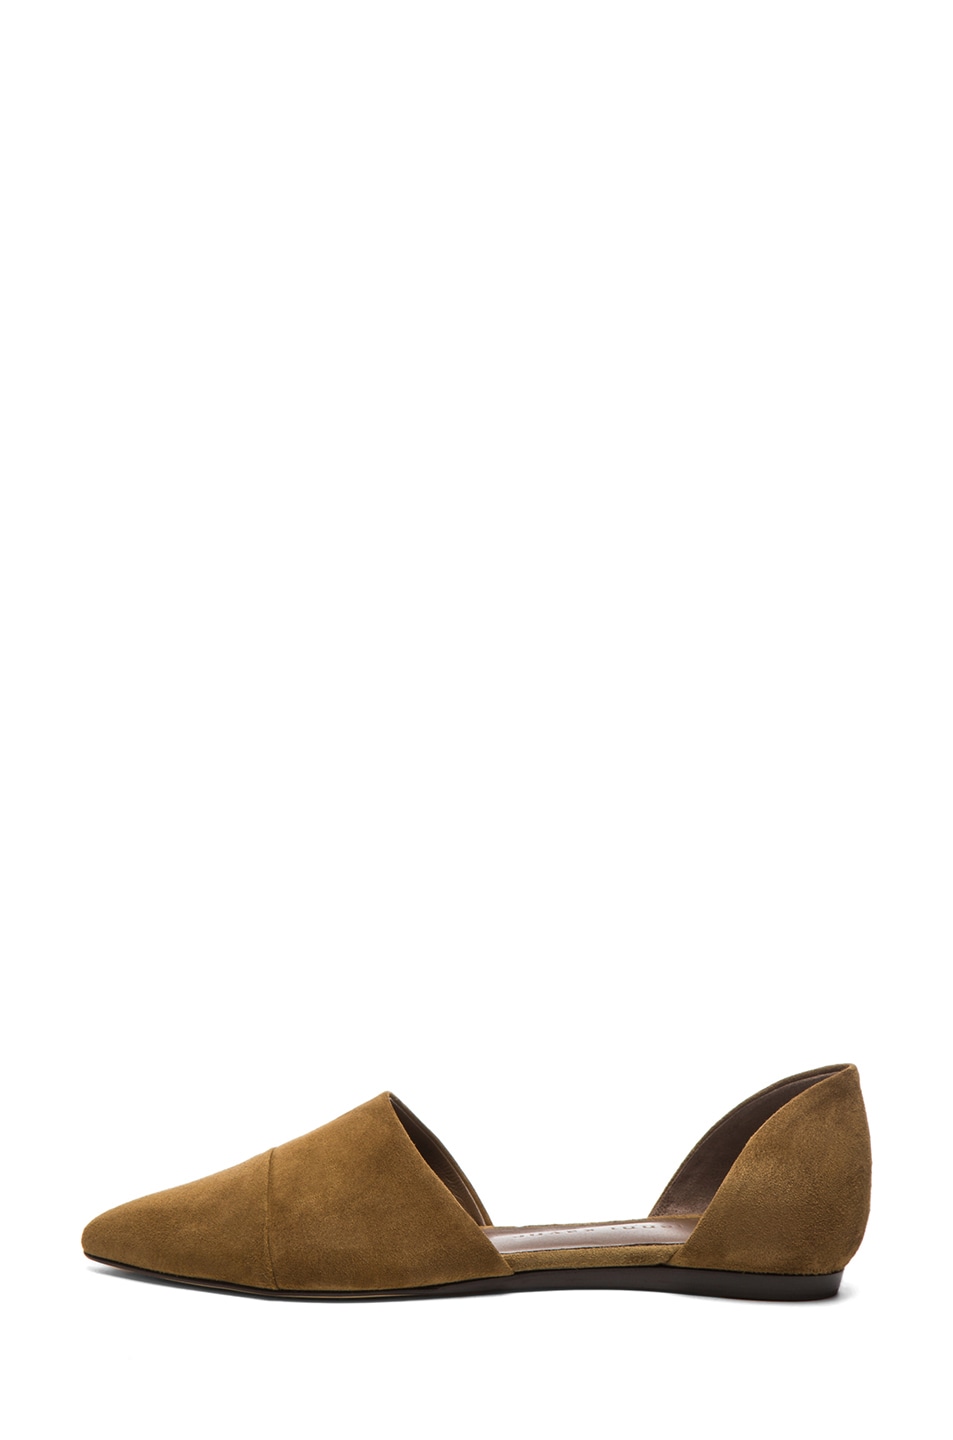 Image 1 of Jenni Kayne D'orsay Suede Flat in Bark